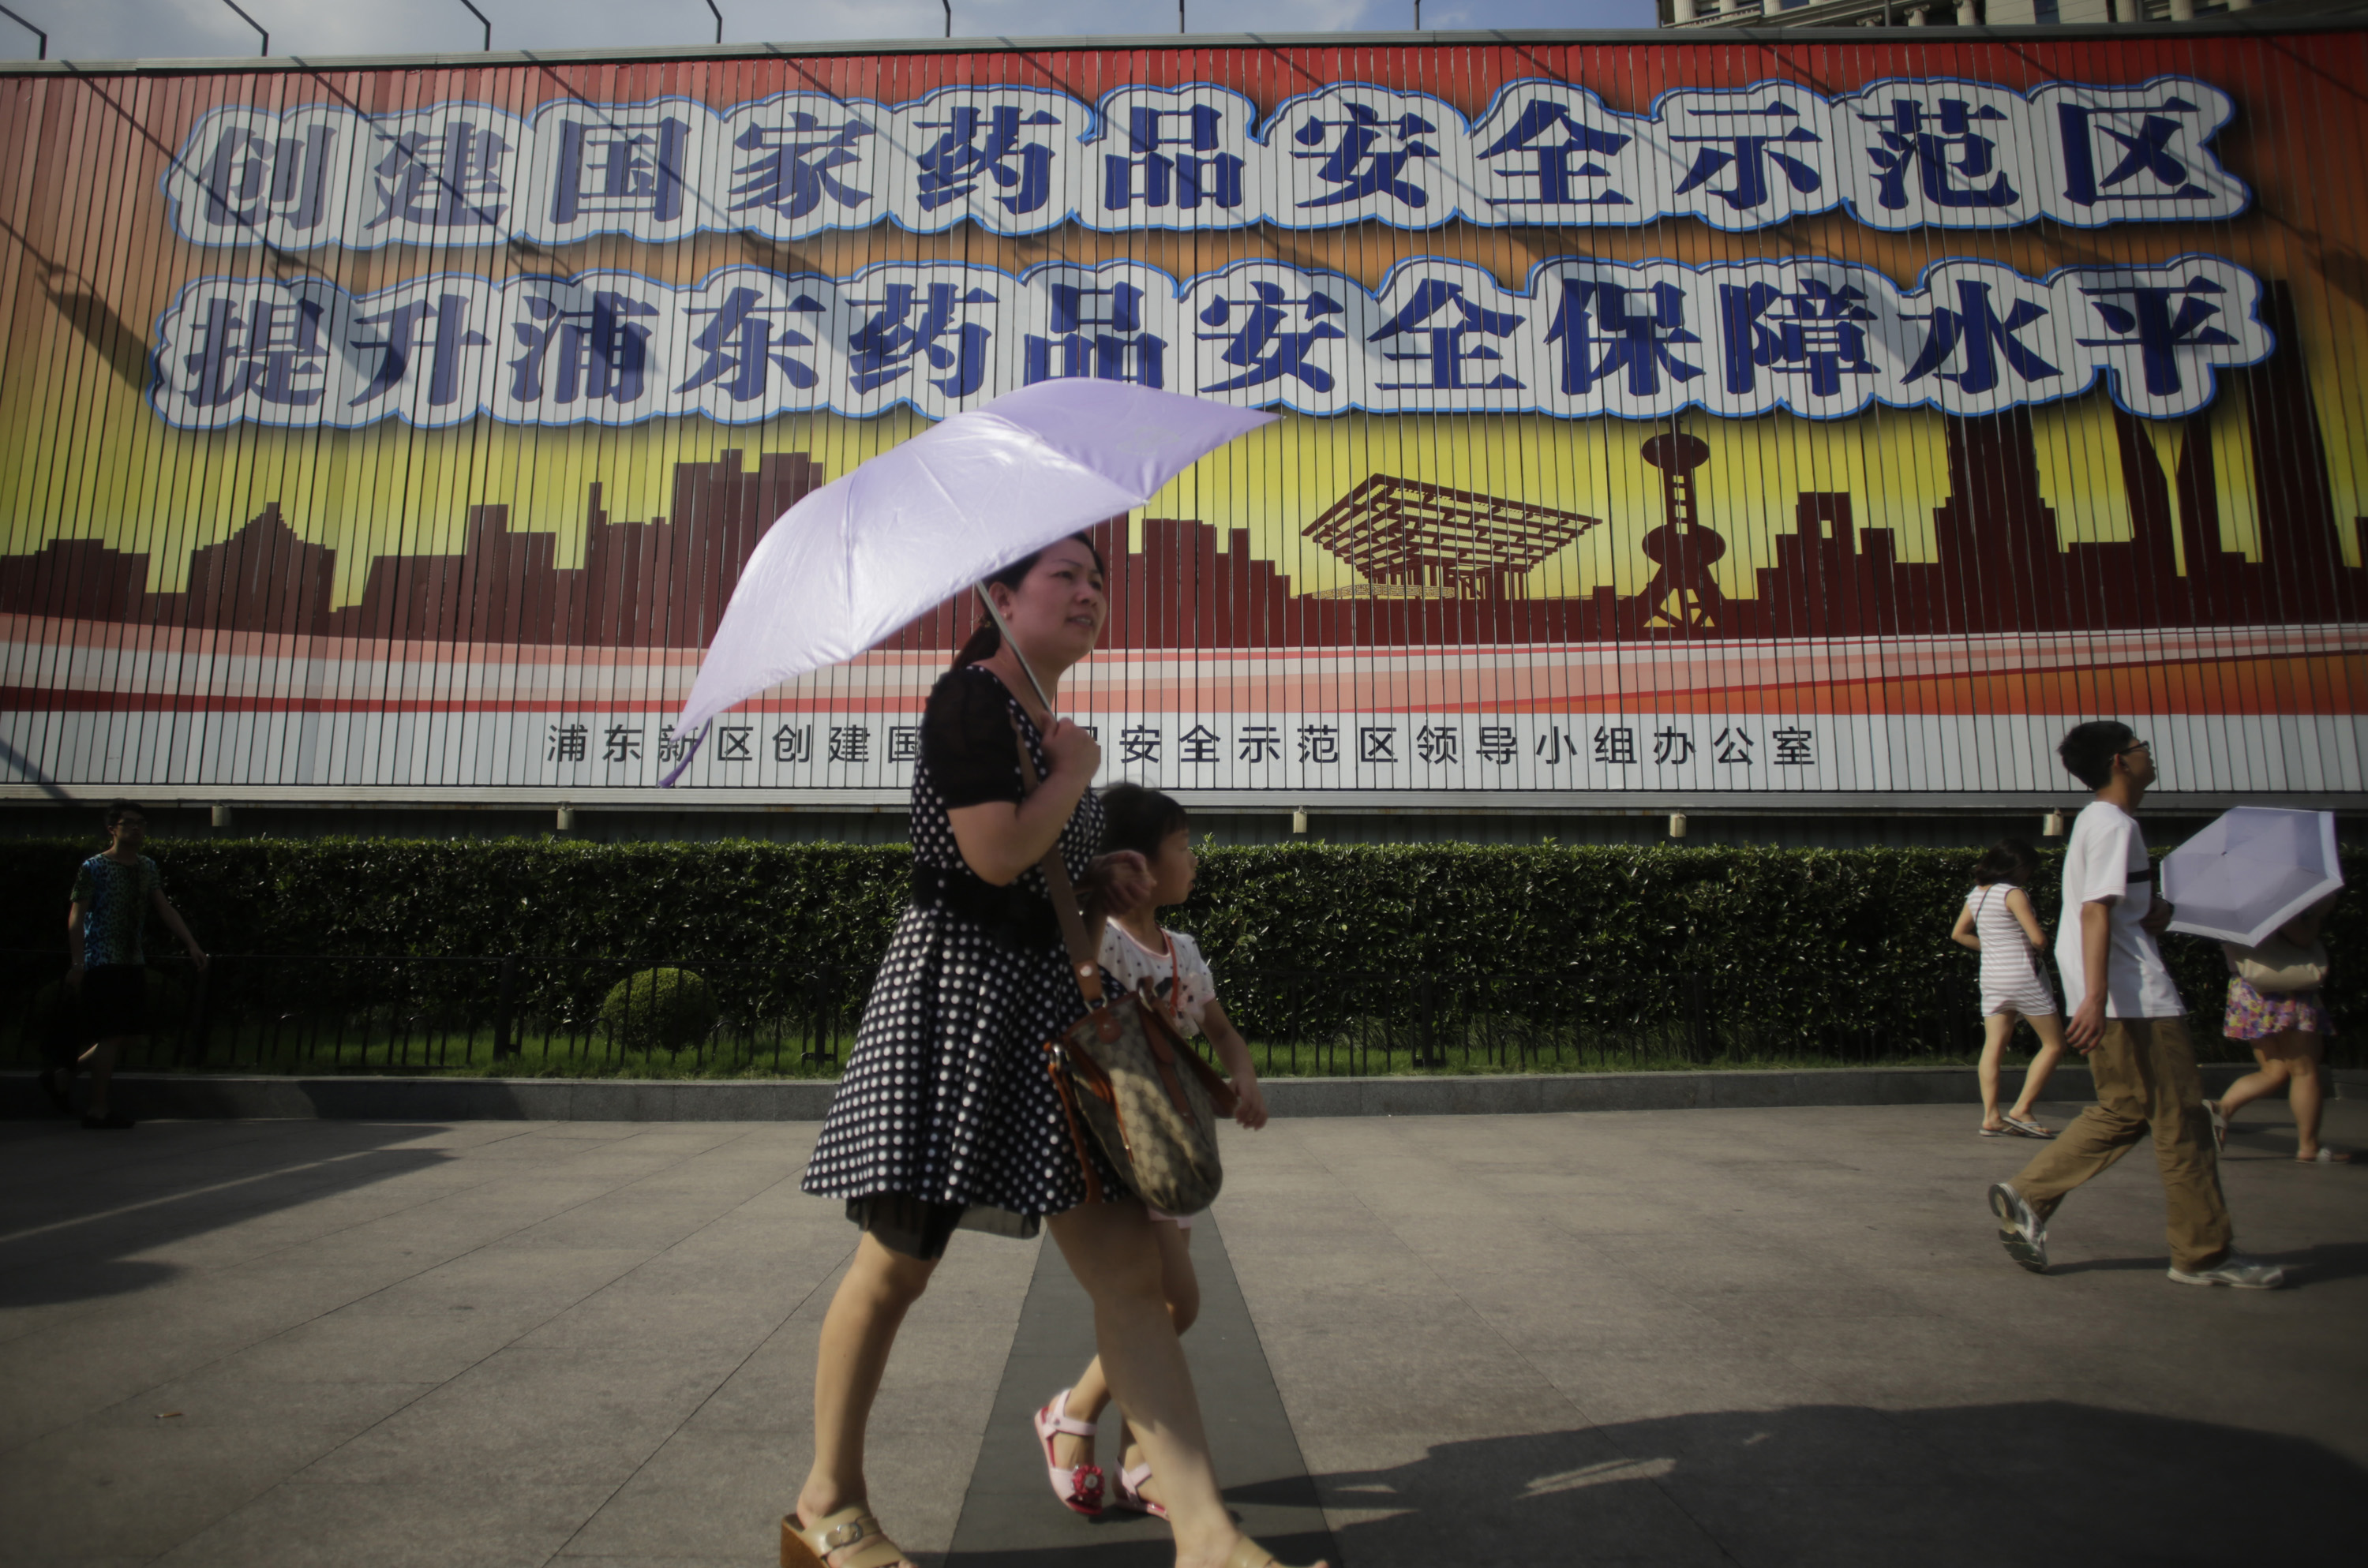  Tourists walk in front of a public service advertisement for drug safety in Shanghai. Photo: AP